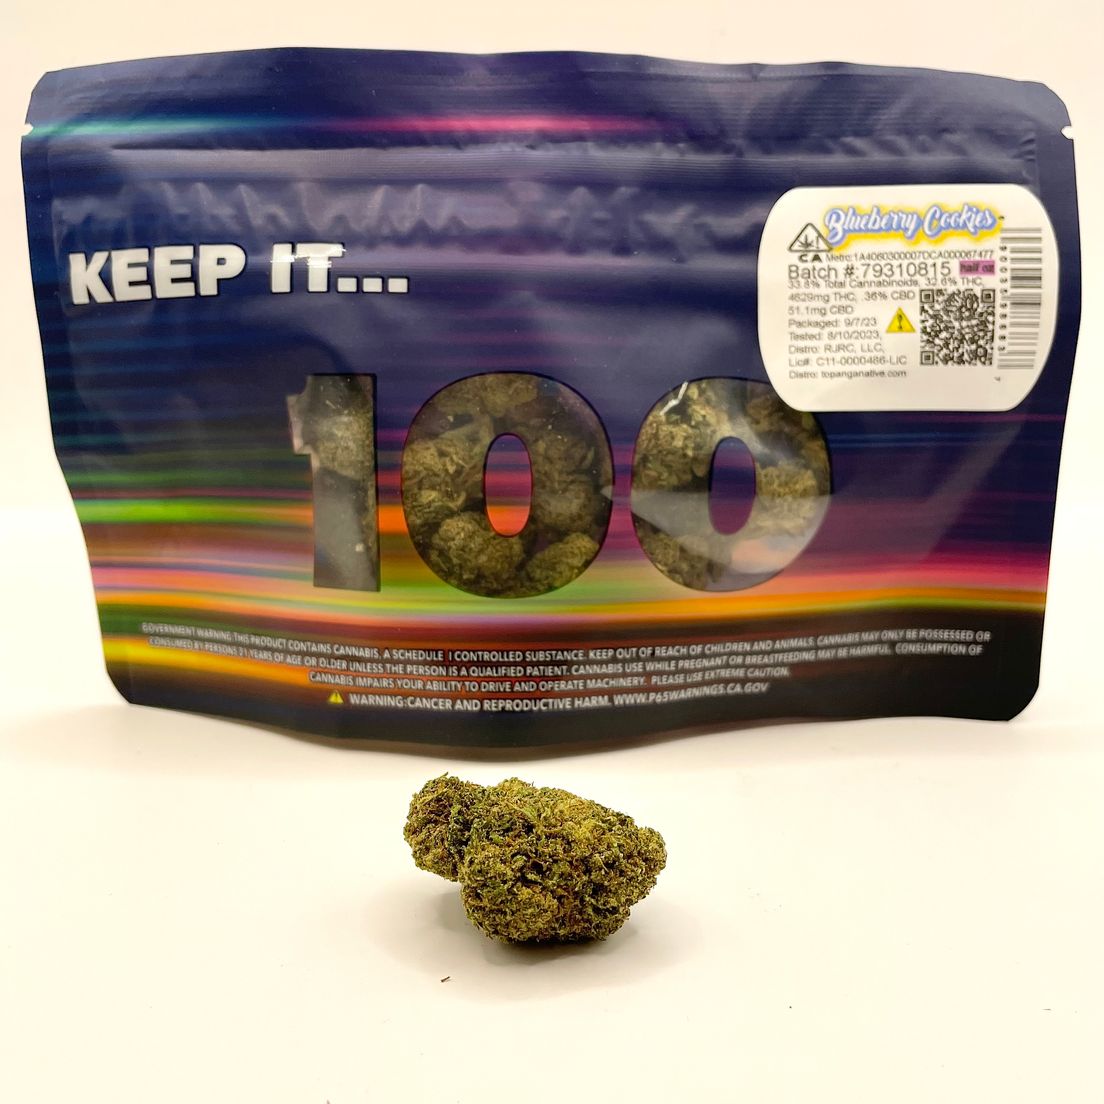 PRE-ORDER ONLY *Deal! $75 1/2 oz. Blueberry Cookies (33.8%/Hybrid - Indica Dom.) - Keep it 100